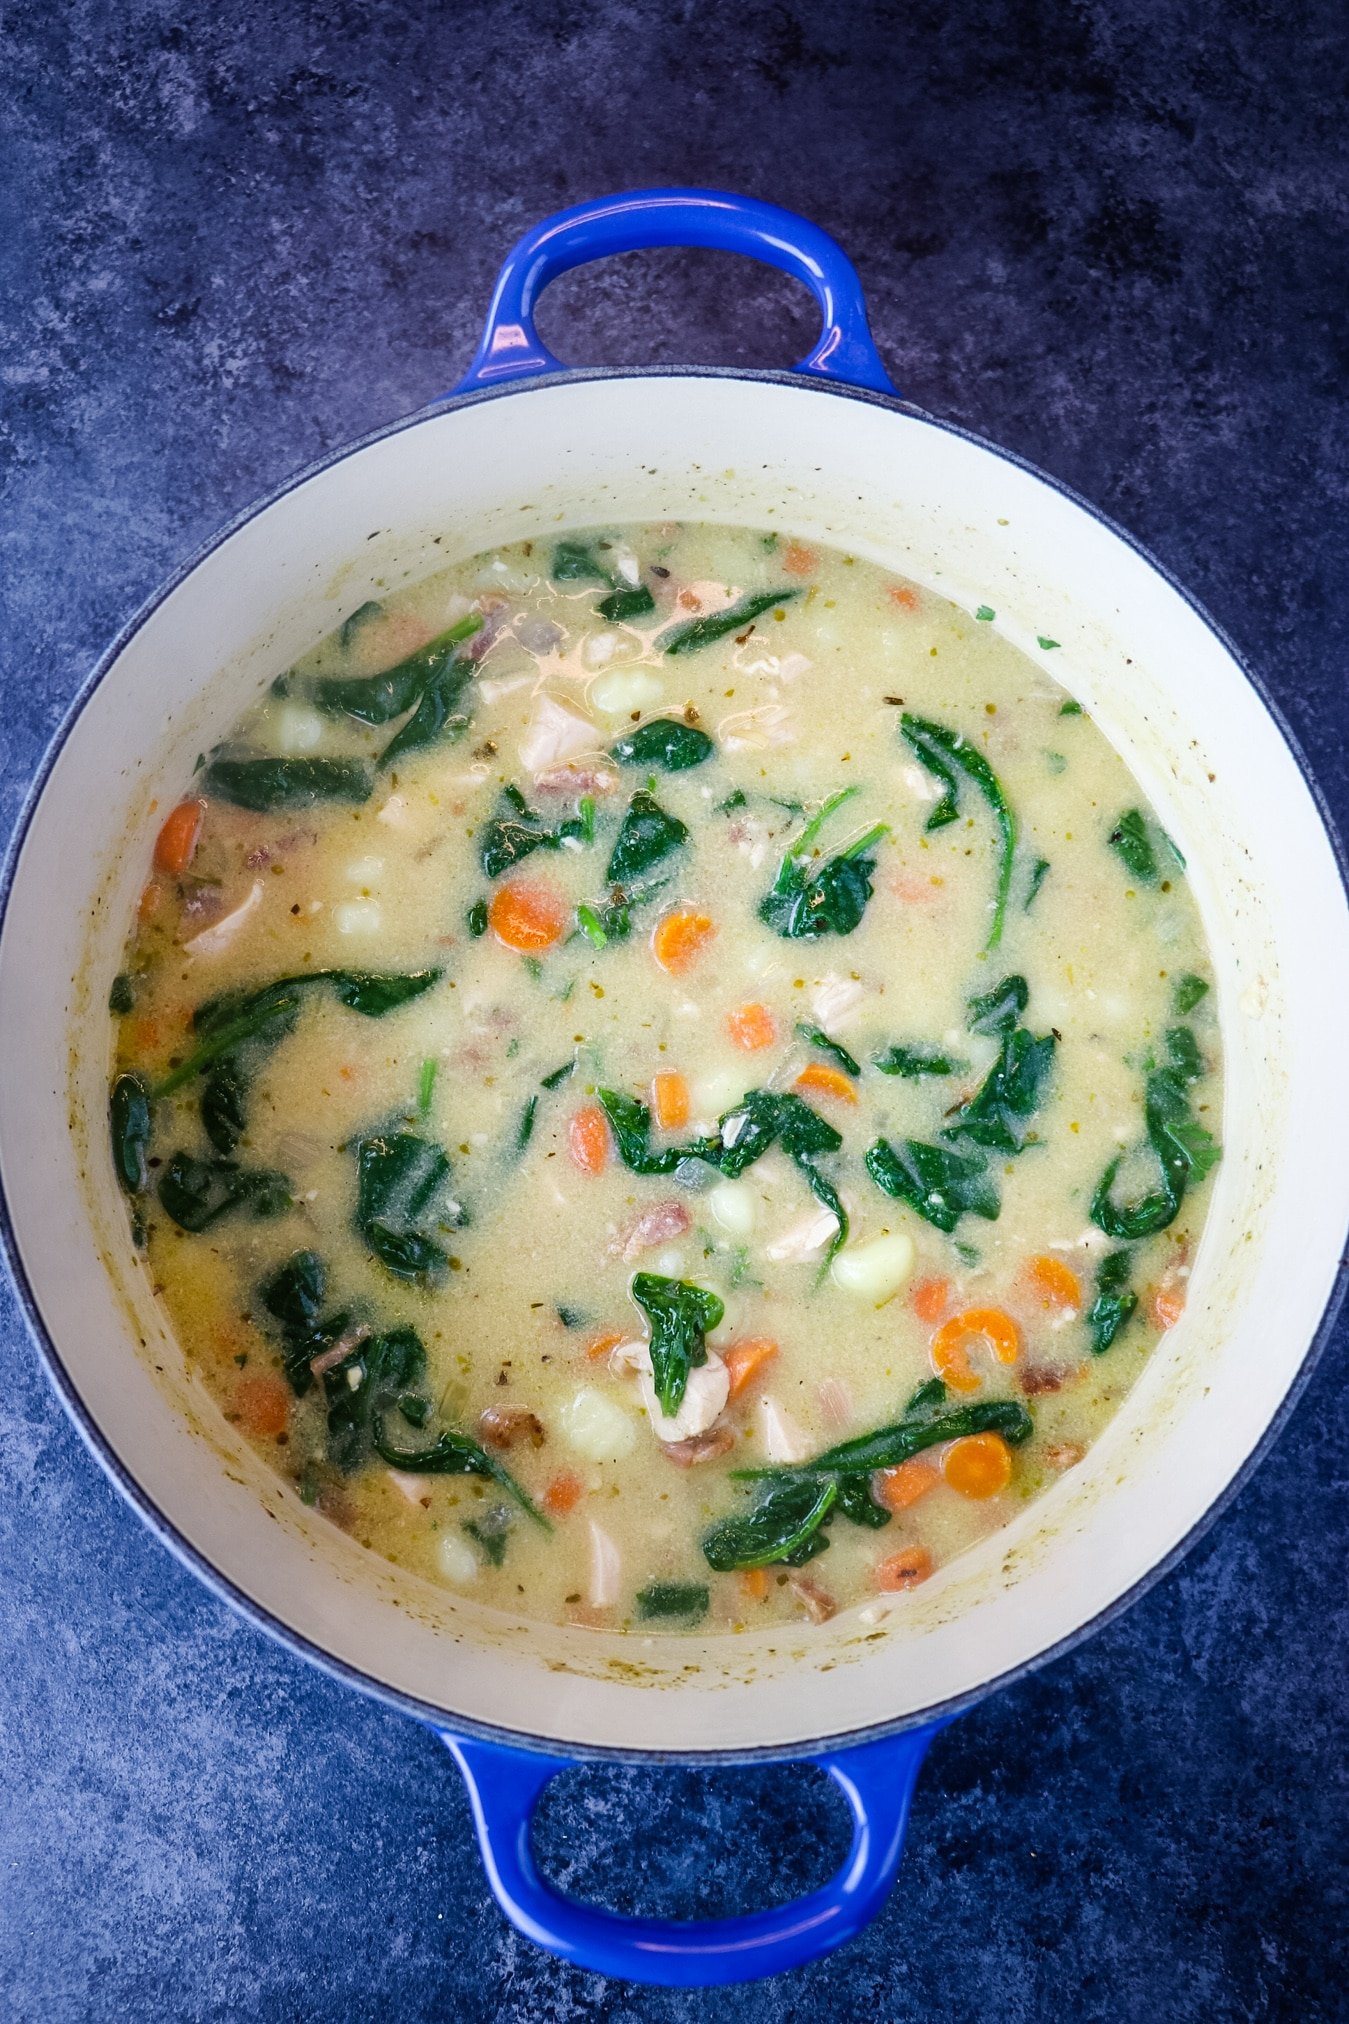 Pot of Olive garden chicken gnocchi soup, with spinach.